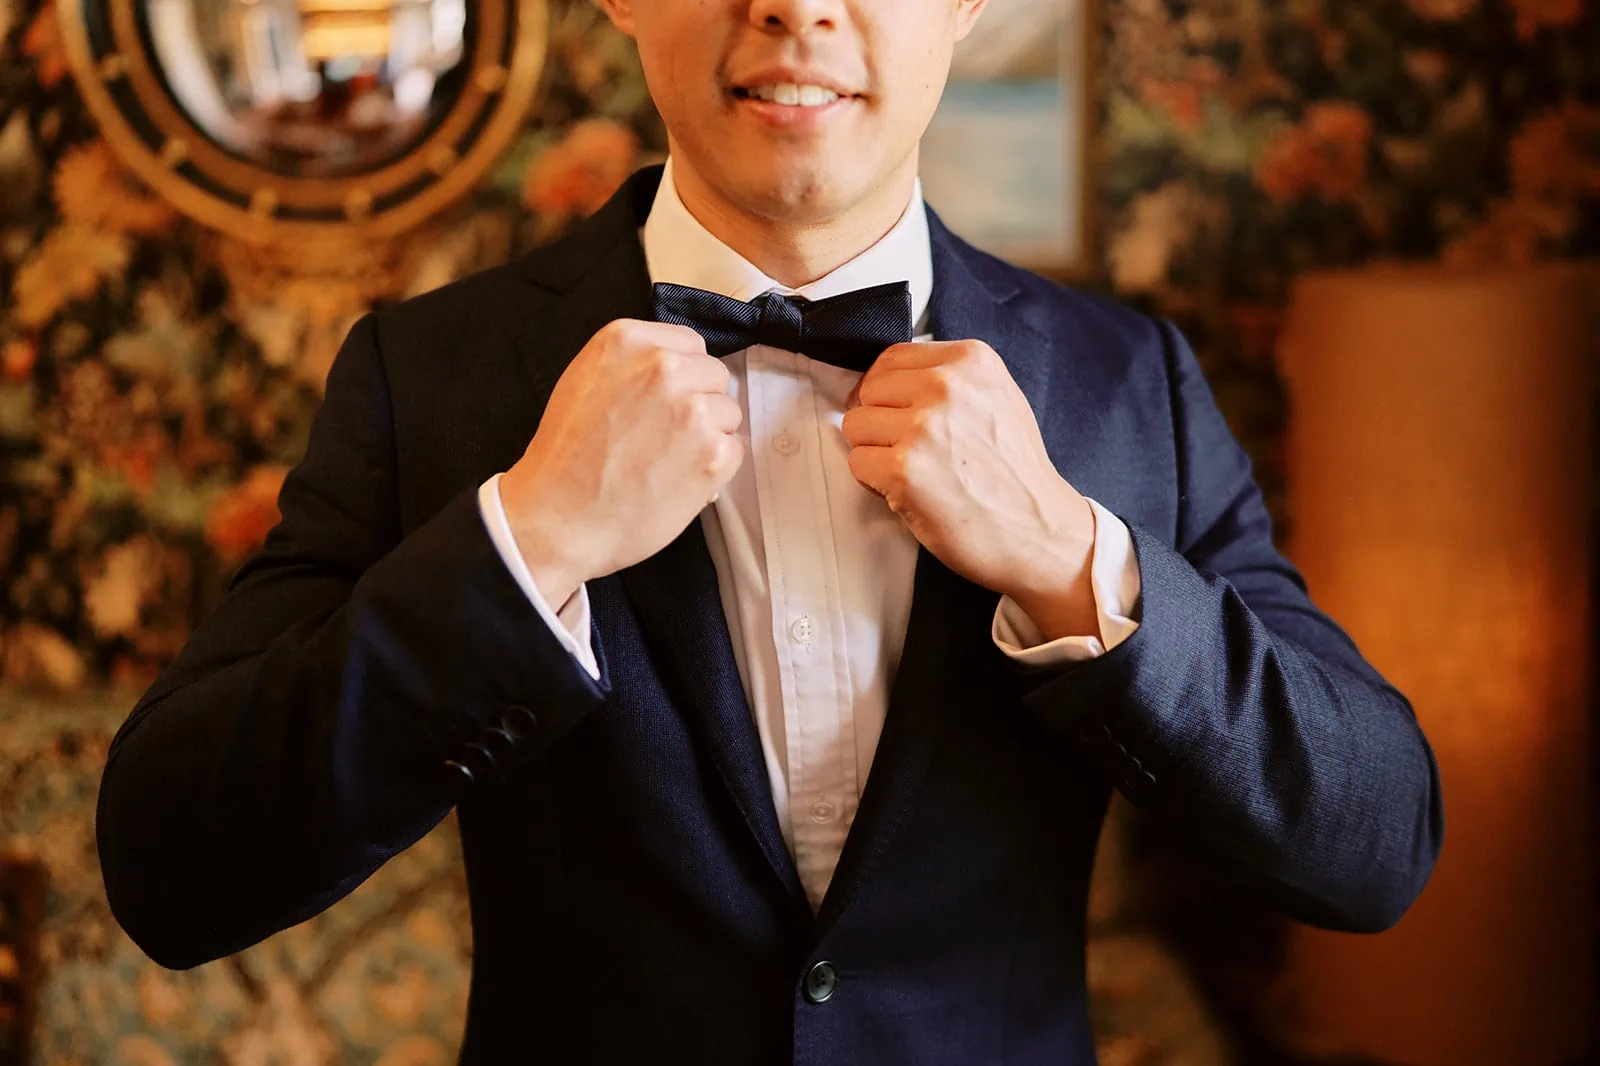 Queenstown Elopement Heli Wedding Photographer クイーンズタウン結婚式 | A dapper gentleman in a suit and bow tie poses elegantly for his pre-wedding photoshoot.